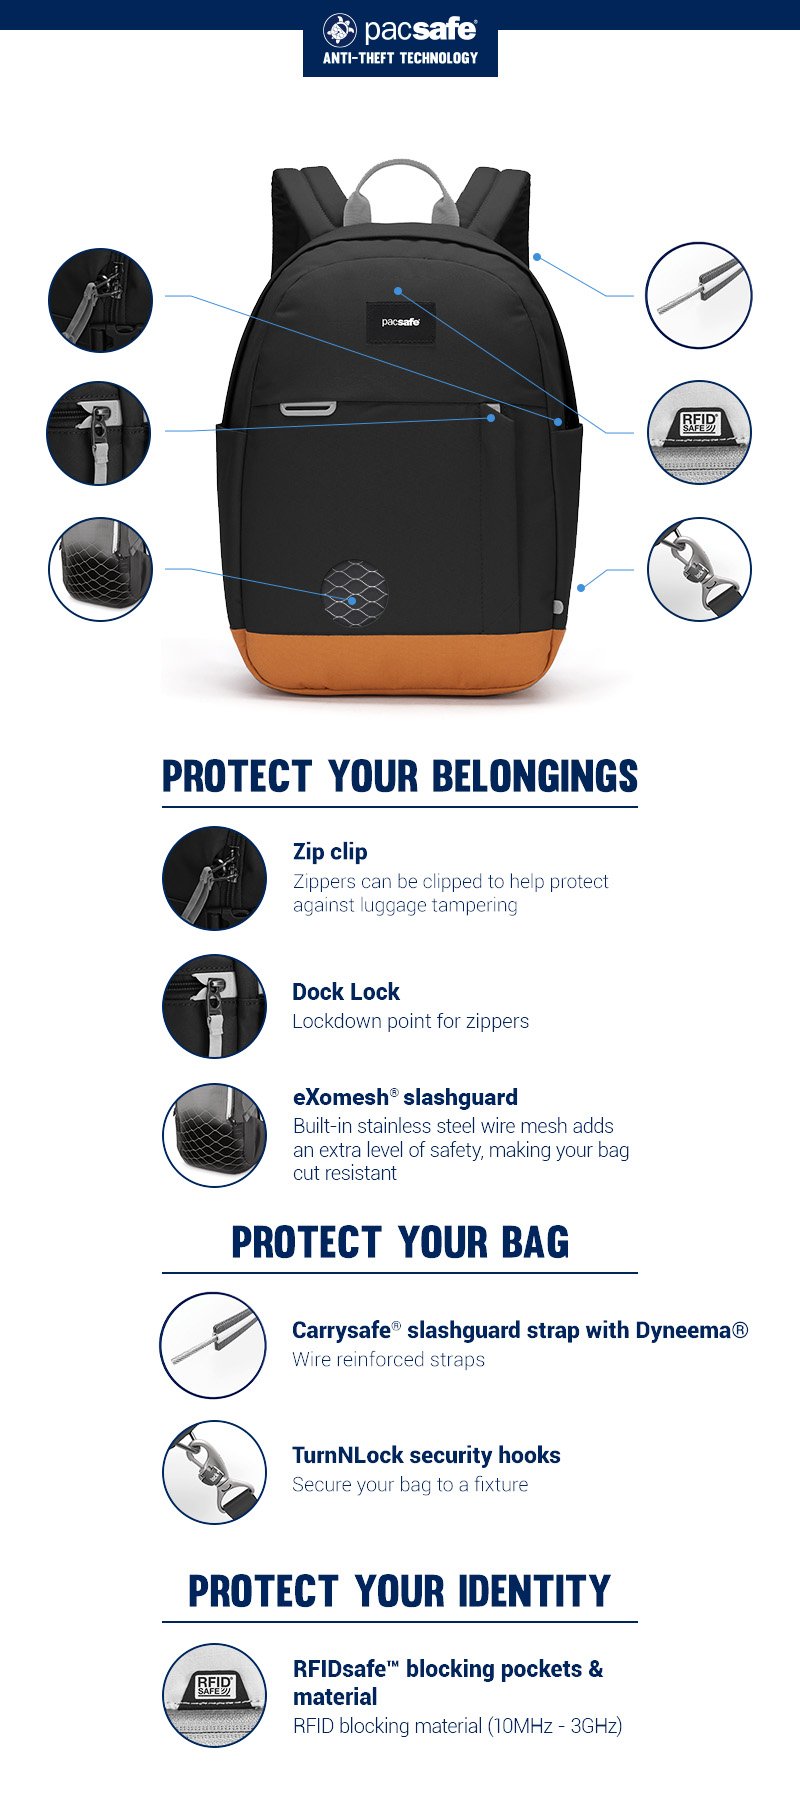 Protect Your Belongings - Zip Clip - Zippers can be clipped to help protect against luggage tempering.
Dock lock - Lock down point for zippers.
eXomesh slashguard - Built-in stainless steel wire mesh adds an extra level of safety, making your bag cut resistant.
Protect Your Bag - Carrysafe slashguard strap with Dyneema - wire reinforced straps.
TurnNLock security hooks - Secure your bag to a fixture.
Protect Your Identity - RFIDsafe blocking pockets & material - RFID blocking material (10 MHz - 3 GHz)